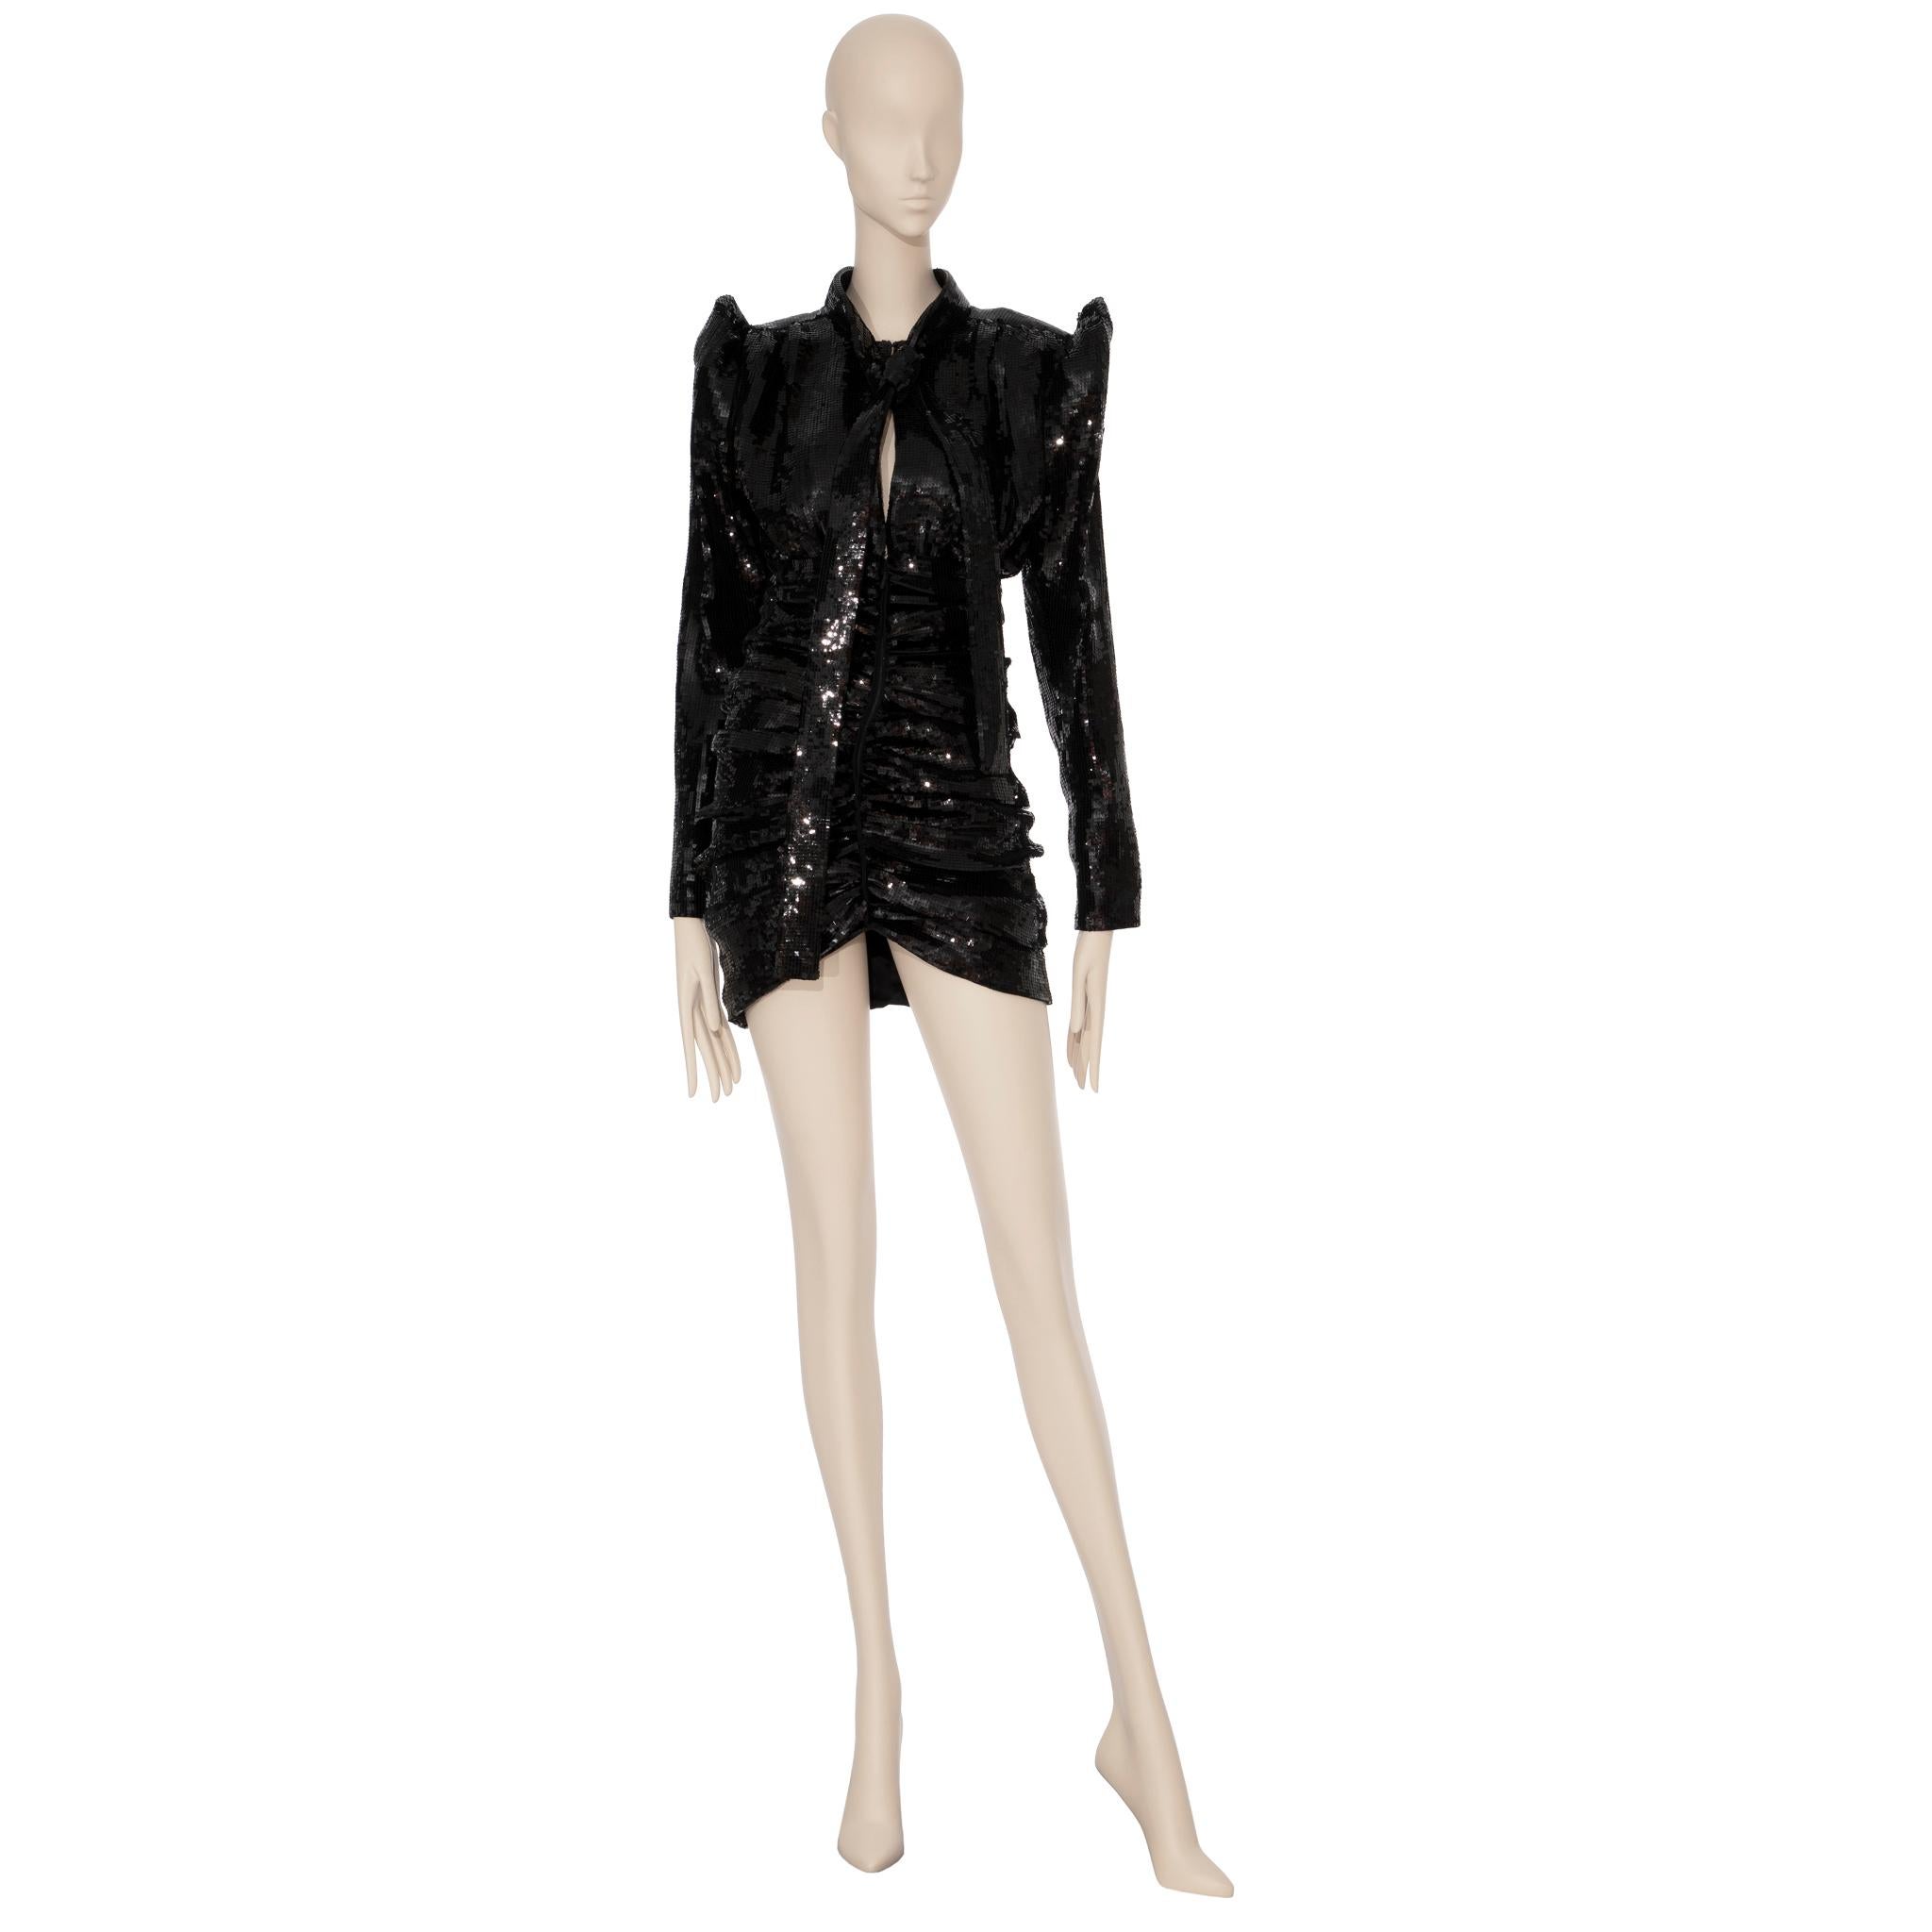 Yves Saint Laurent Long Sleeve Black Sequin Dress 38 Fr In New Condition For Sale In DOUBLE BAY, NSW